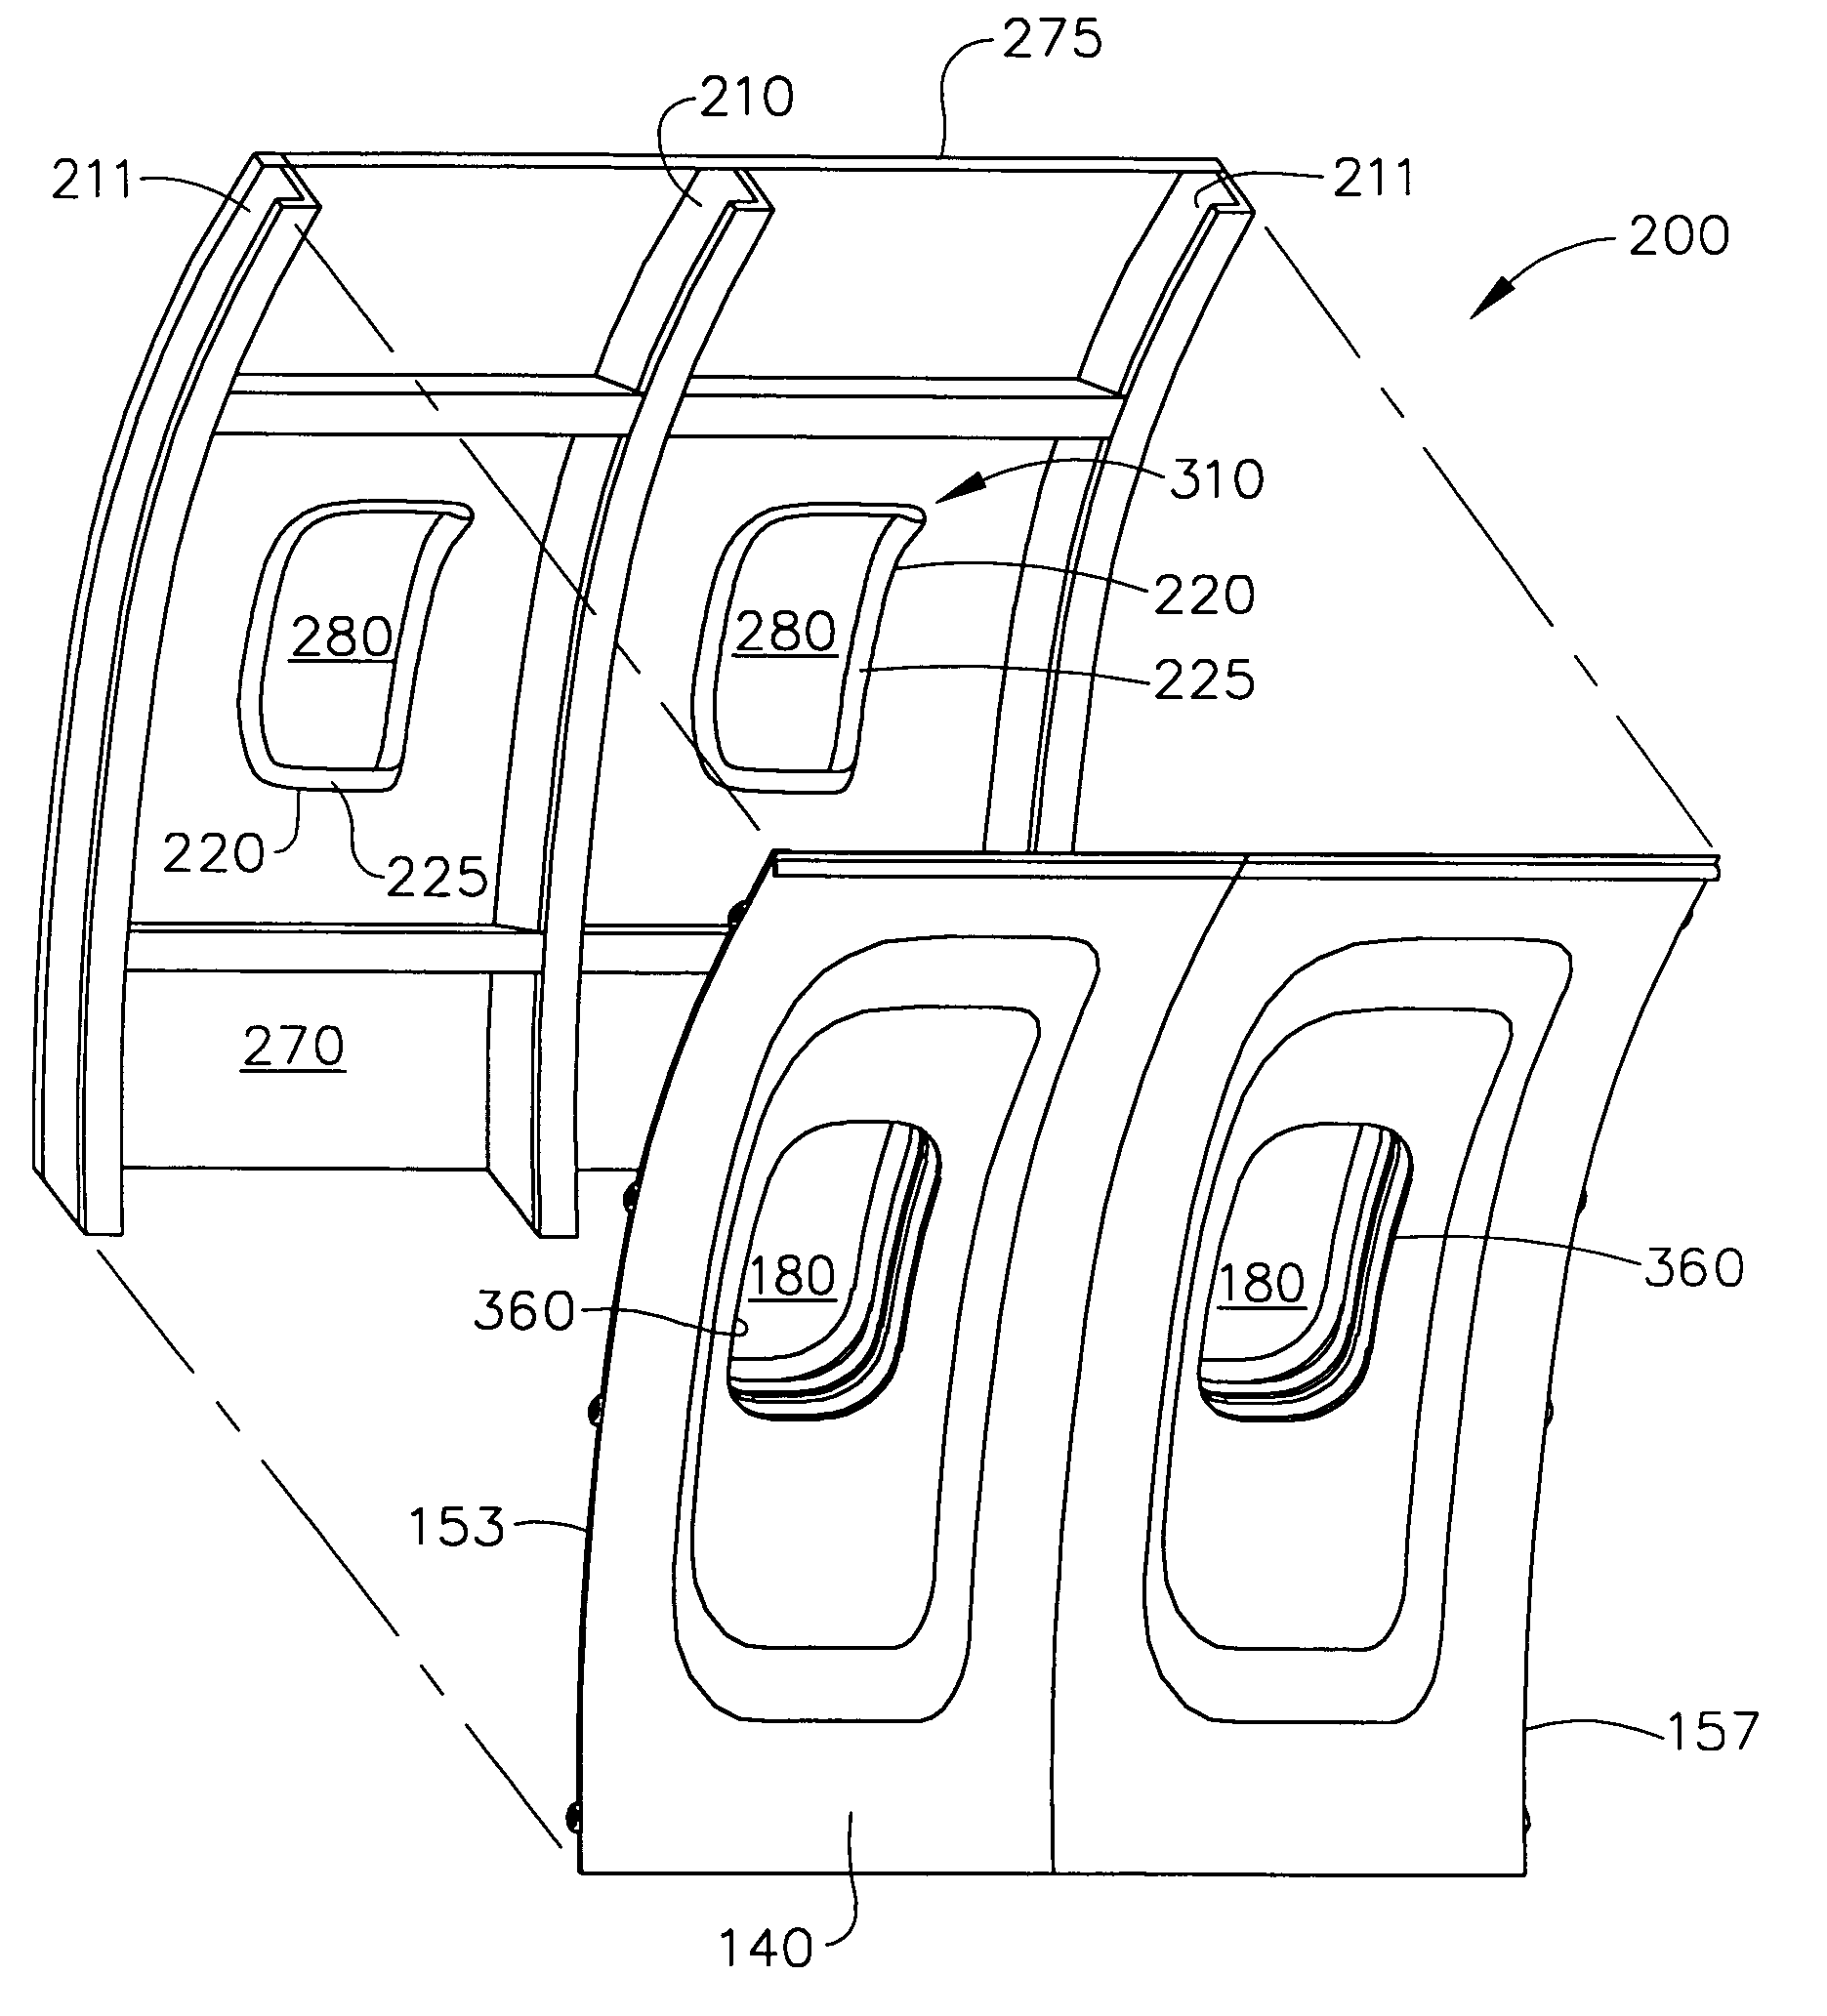 Integrated window belt system for aircraft cabins